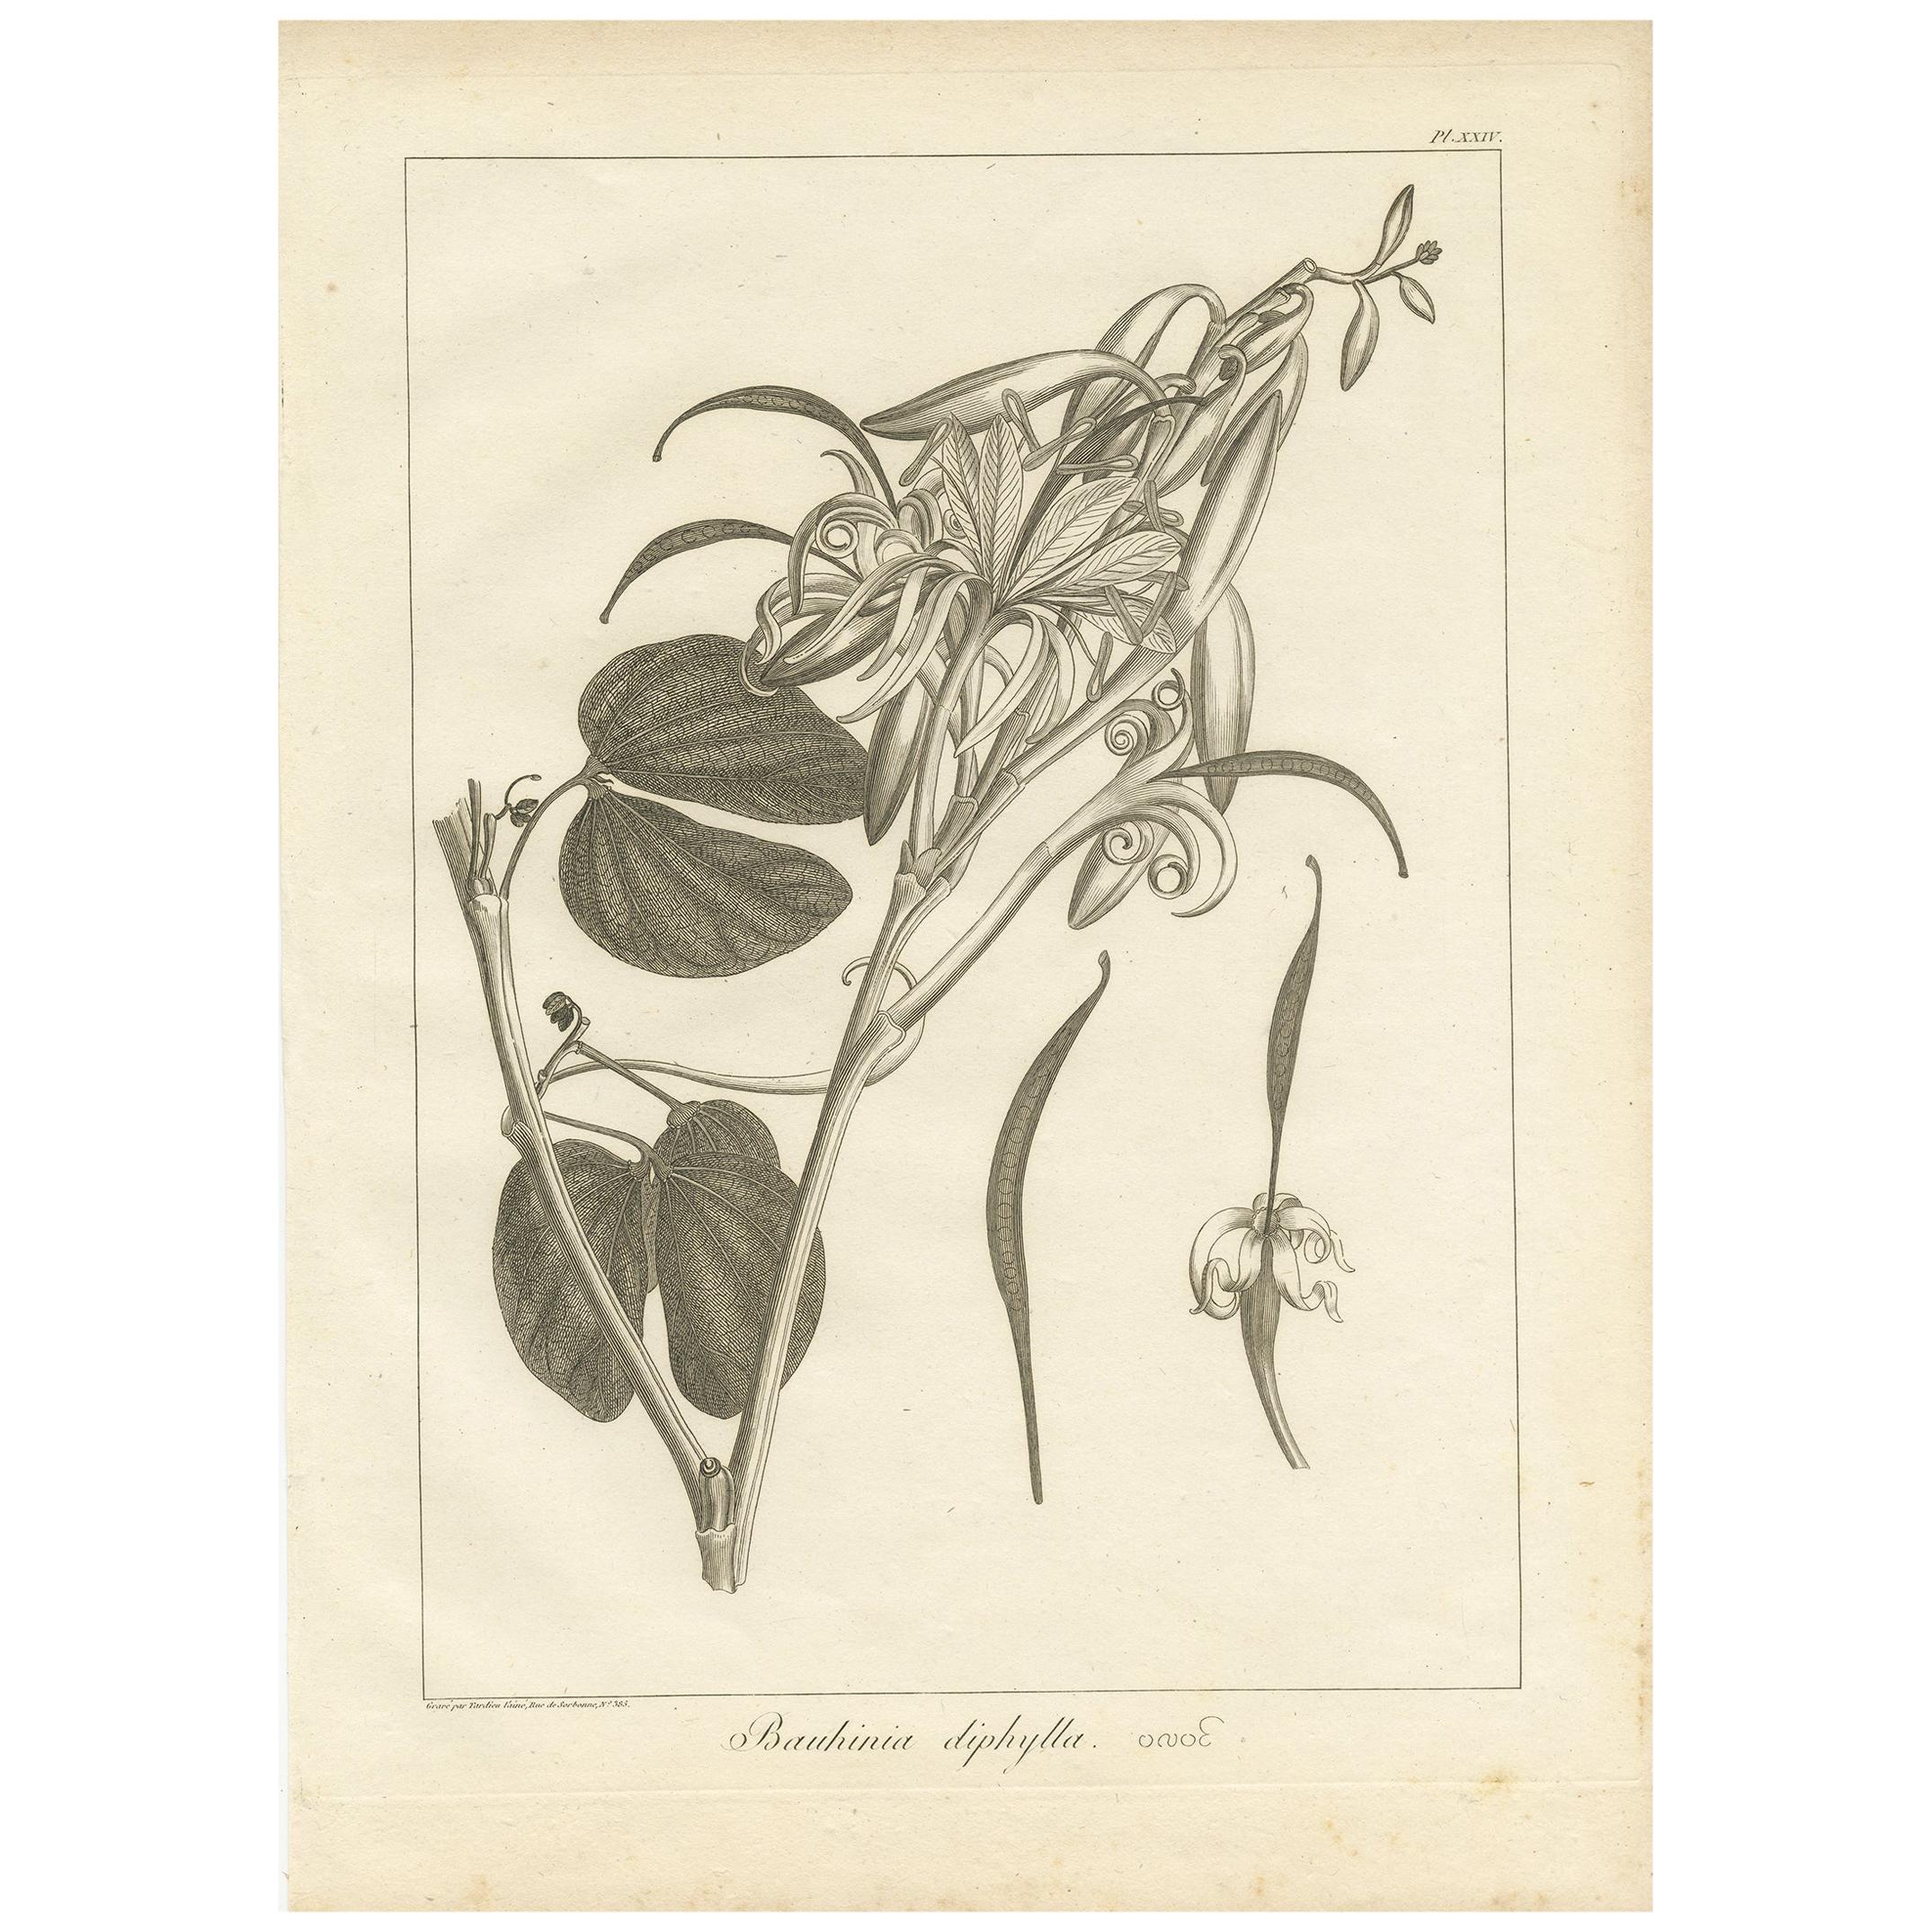 Antique Print of the Bauhinia Diphylla Plant by Symes, 1800